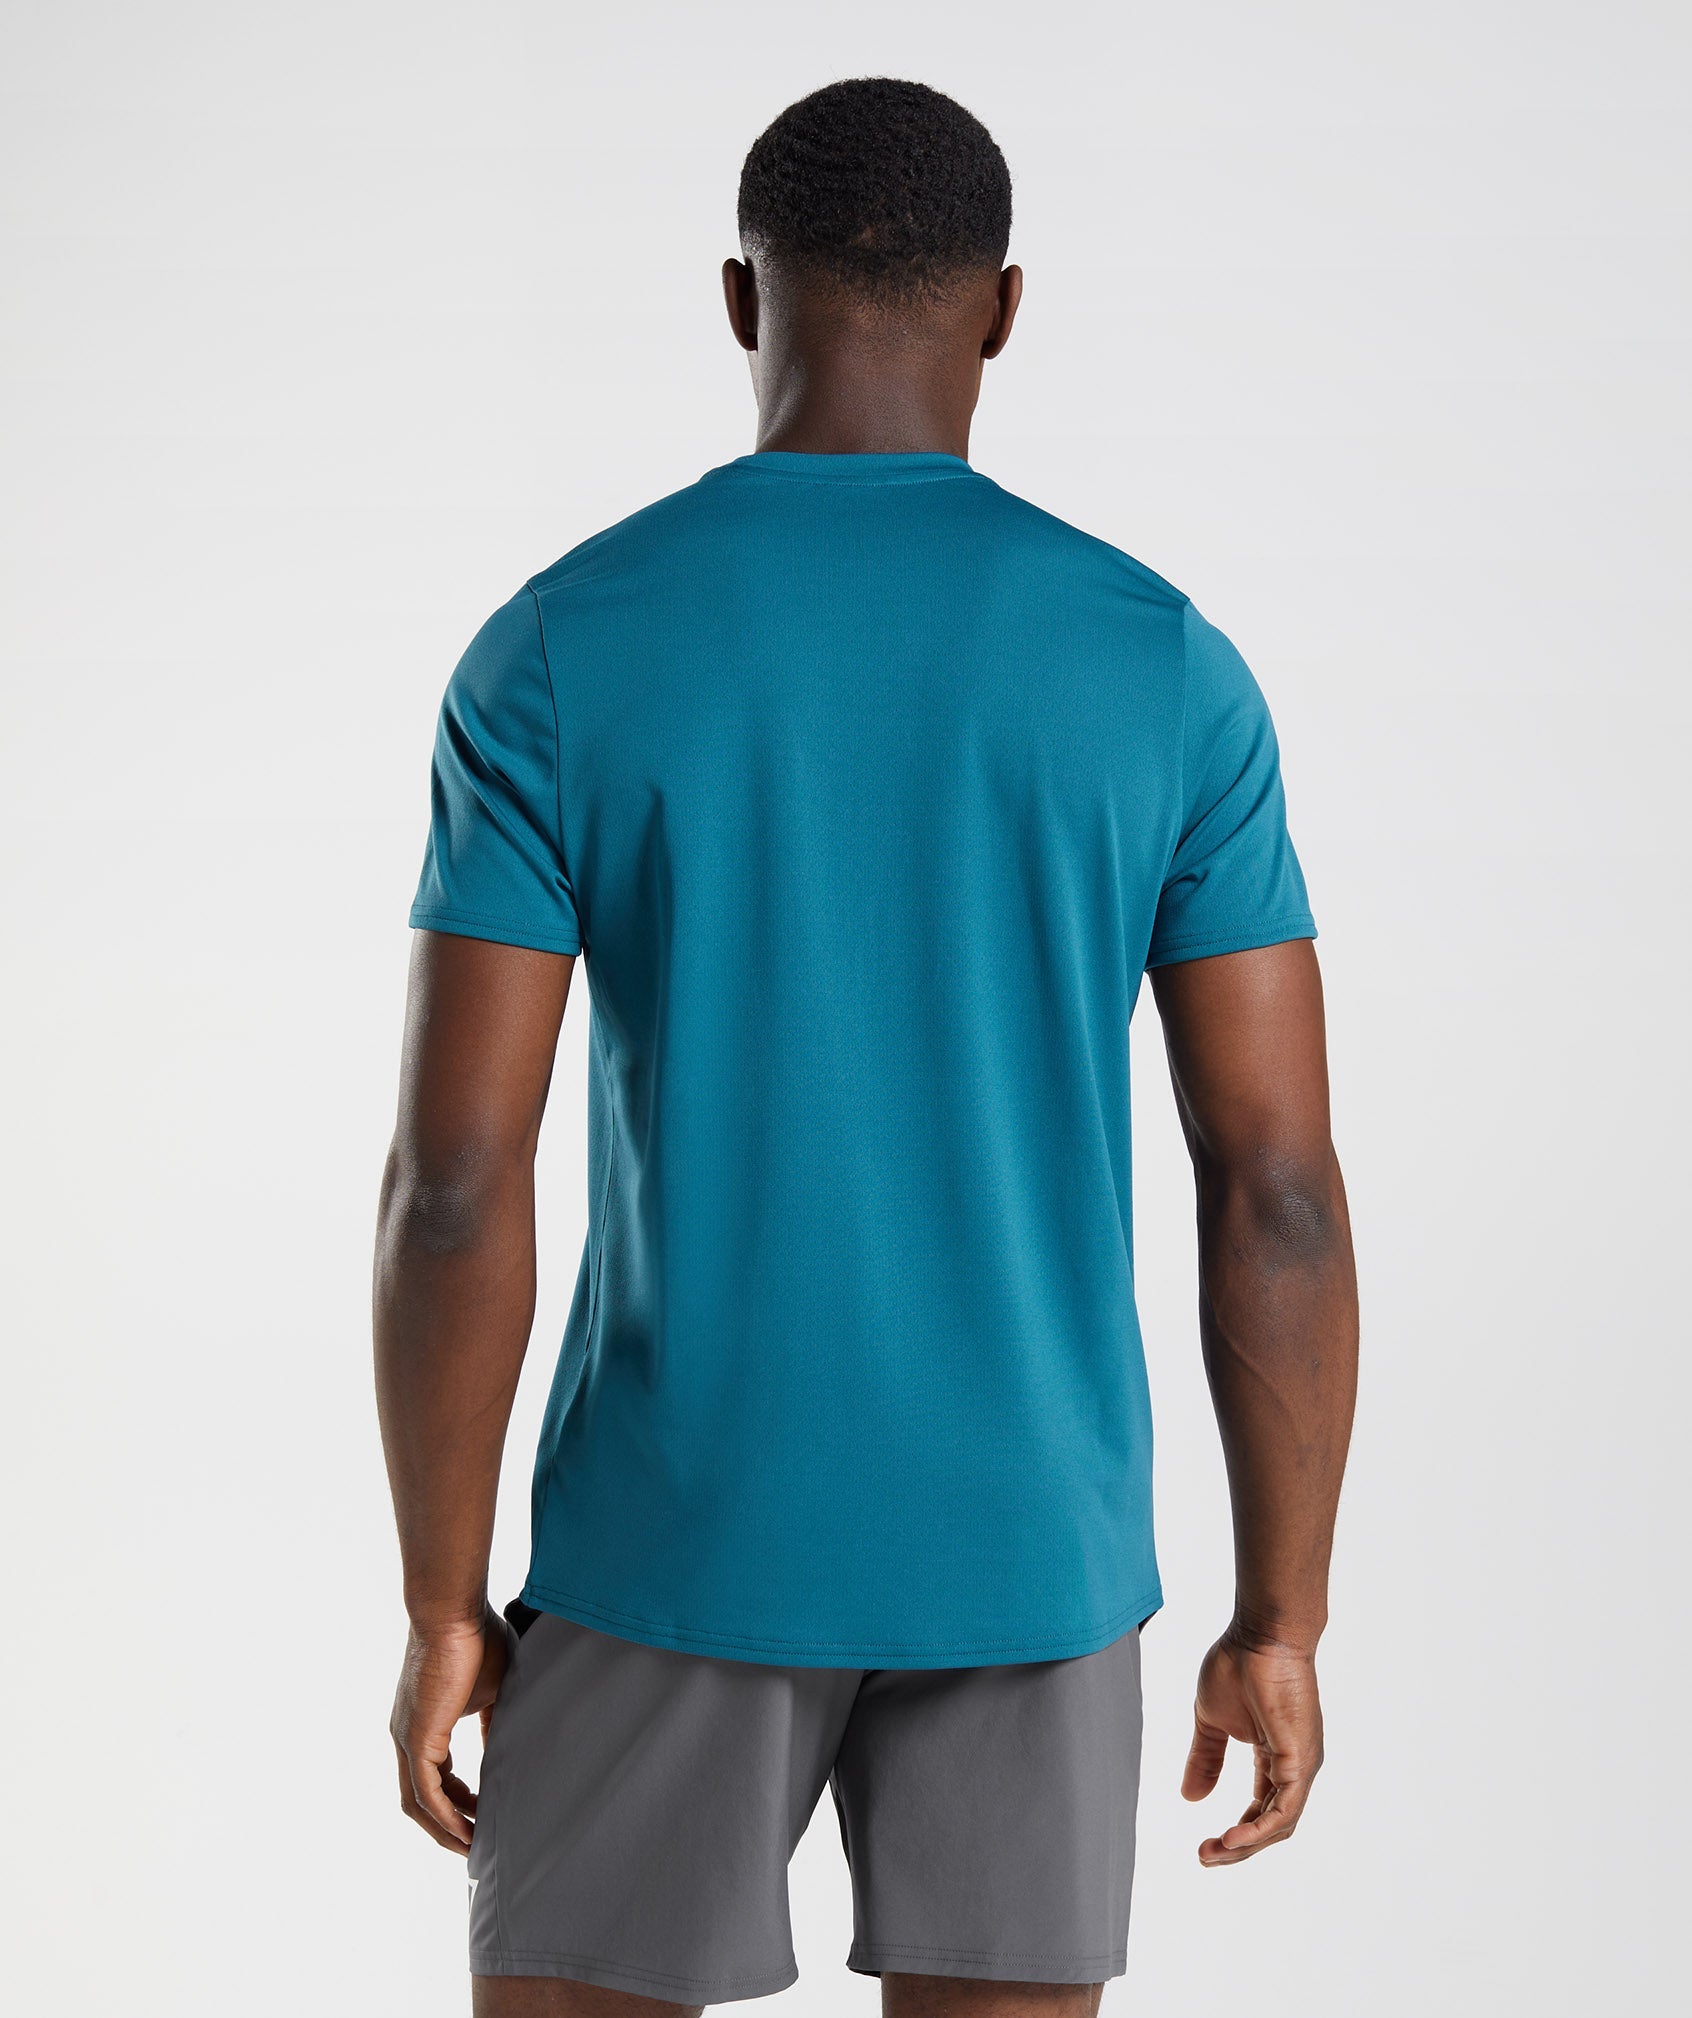 Arrival T-Shirt in Atlantic Blue - view 2